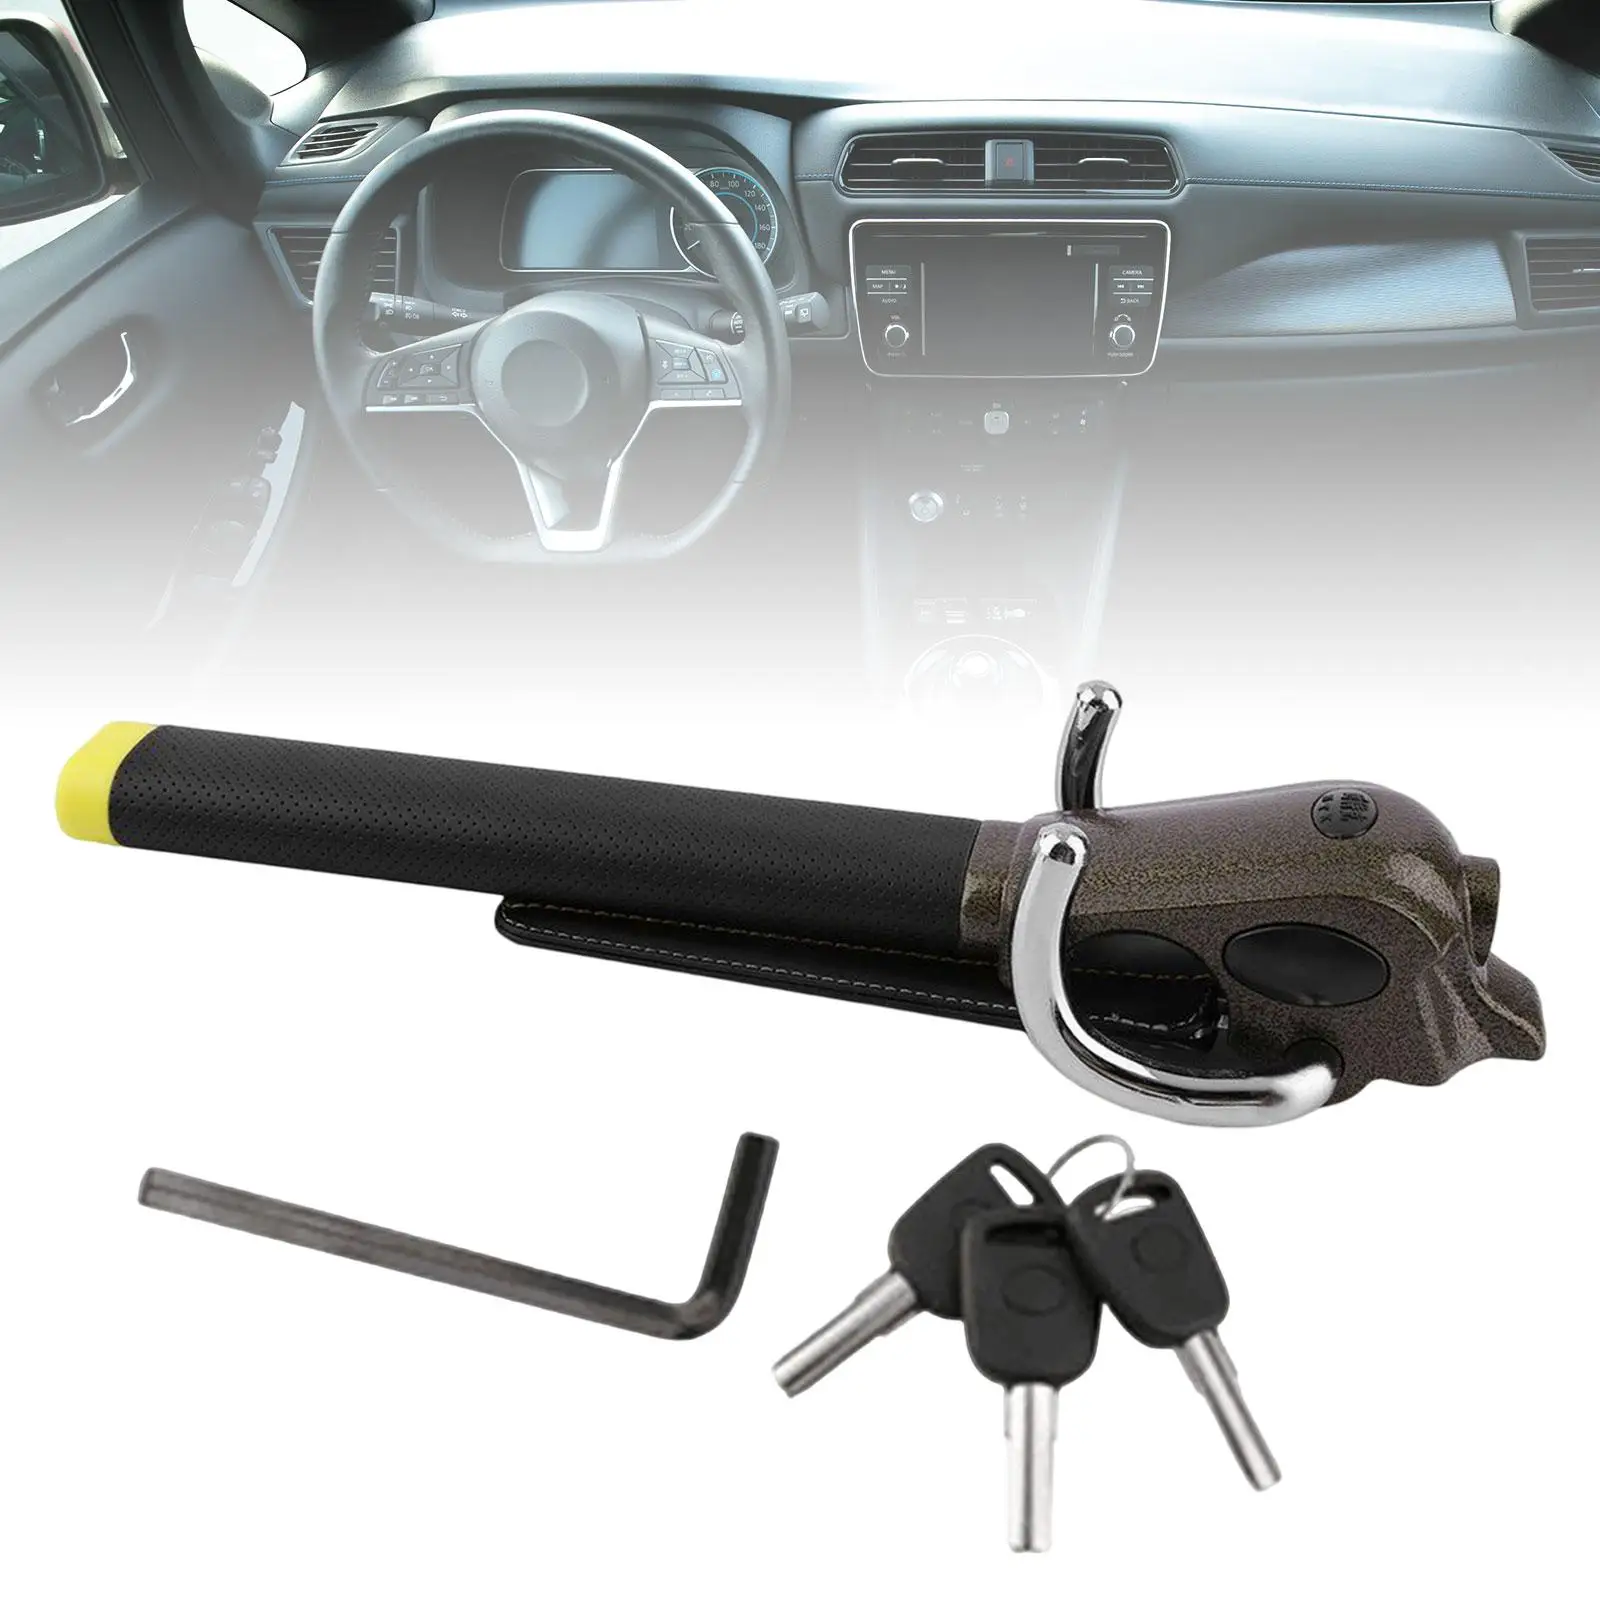 Steering Wheel Lock with 3 Keys Car Heavy Duty Security Lock Sturdy Vehicles Lock Accessories for Truck Vehicles Cars SUV